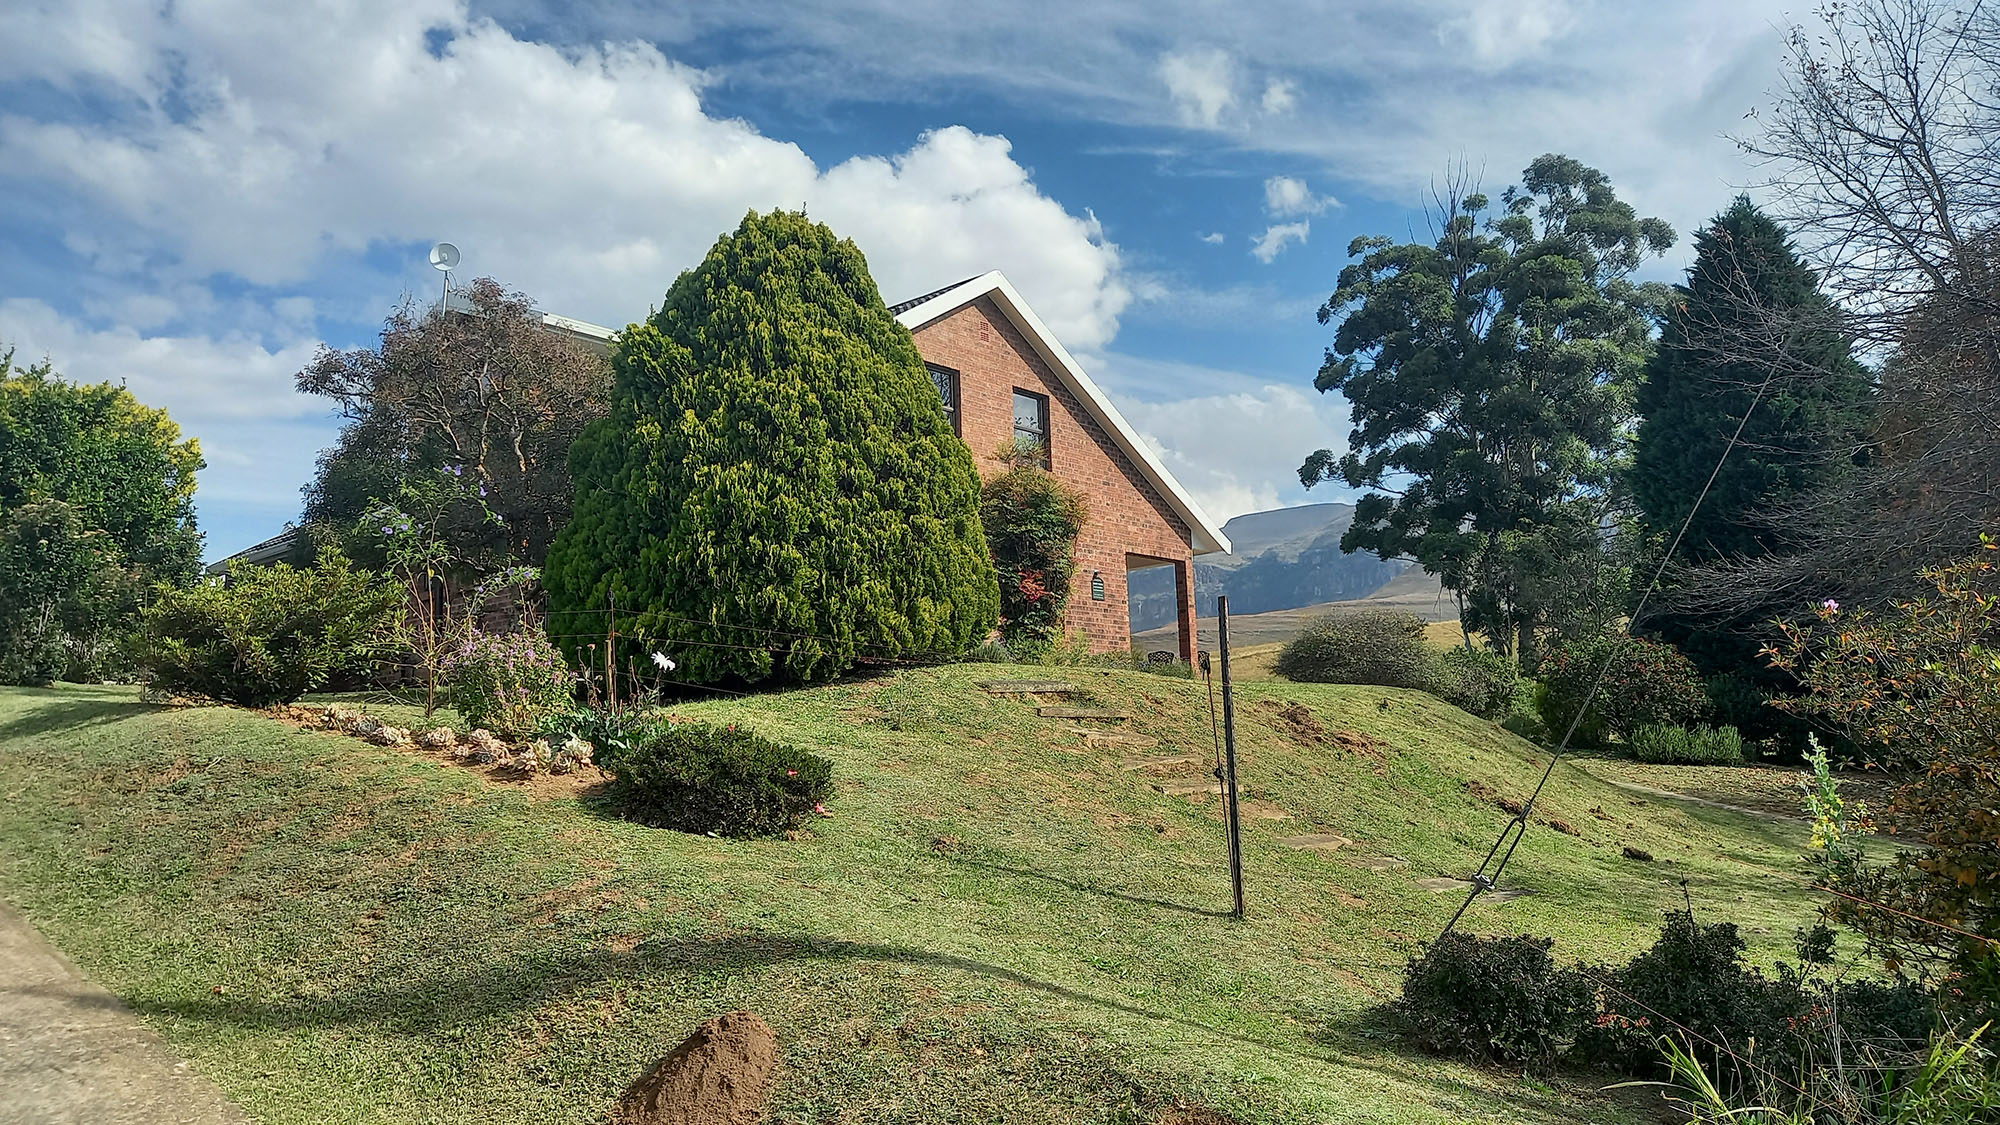 Misty Peaks luxury accommodation in South Africa's Central Drakensberg featuring stunning views and adventure activities.